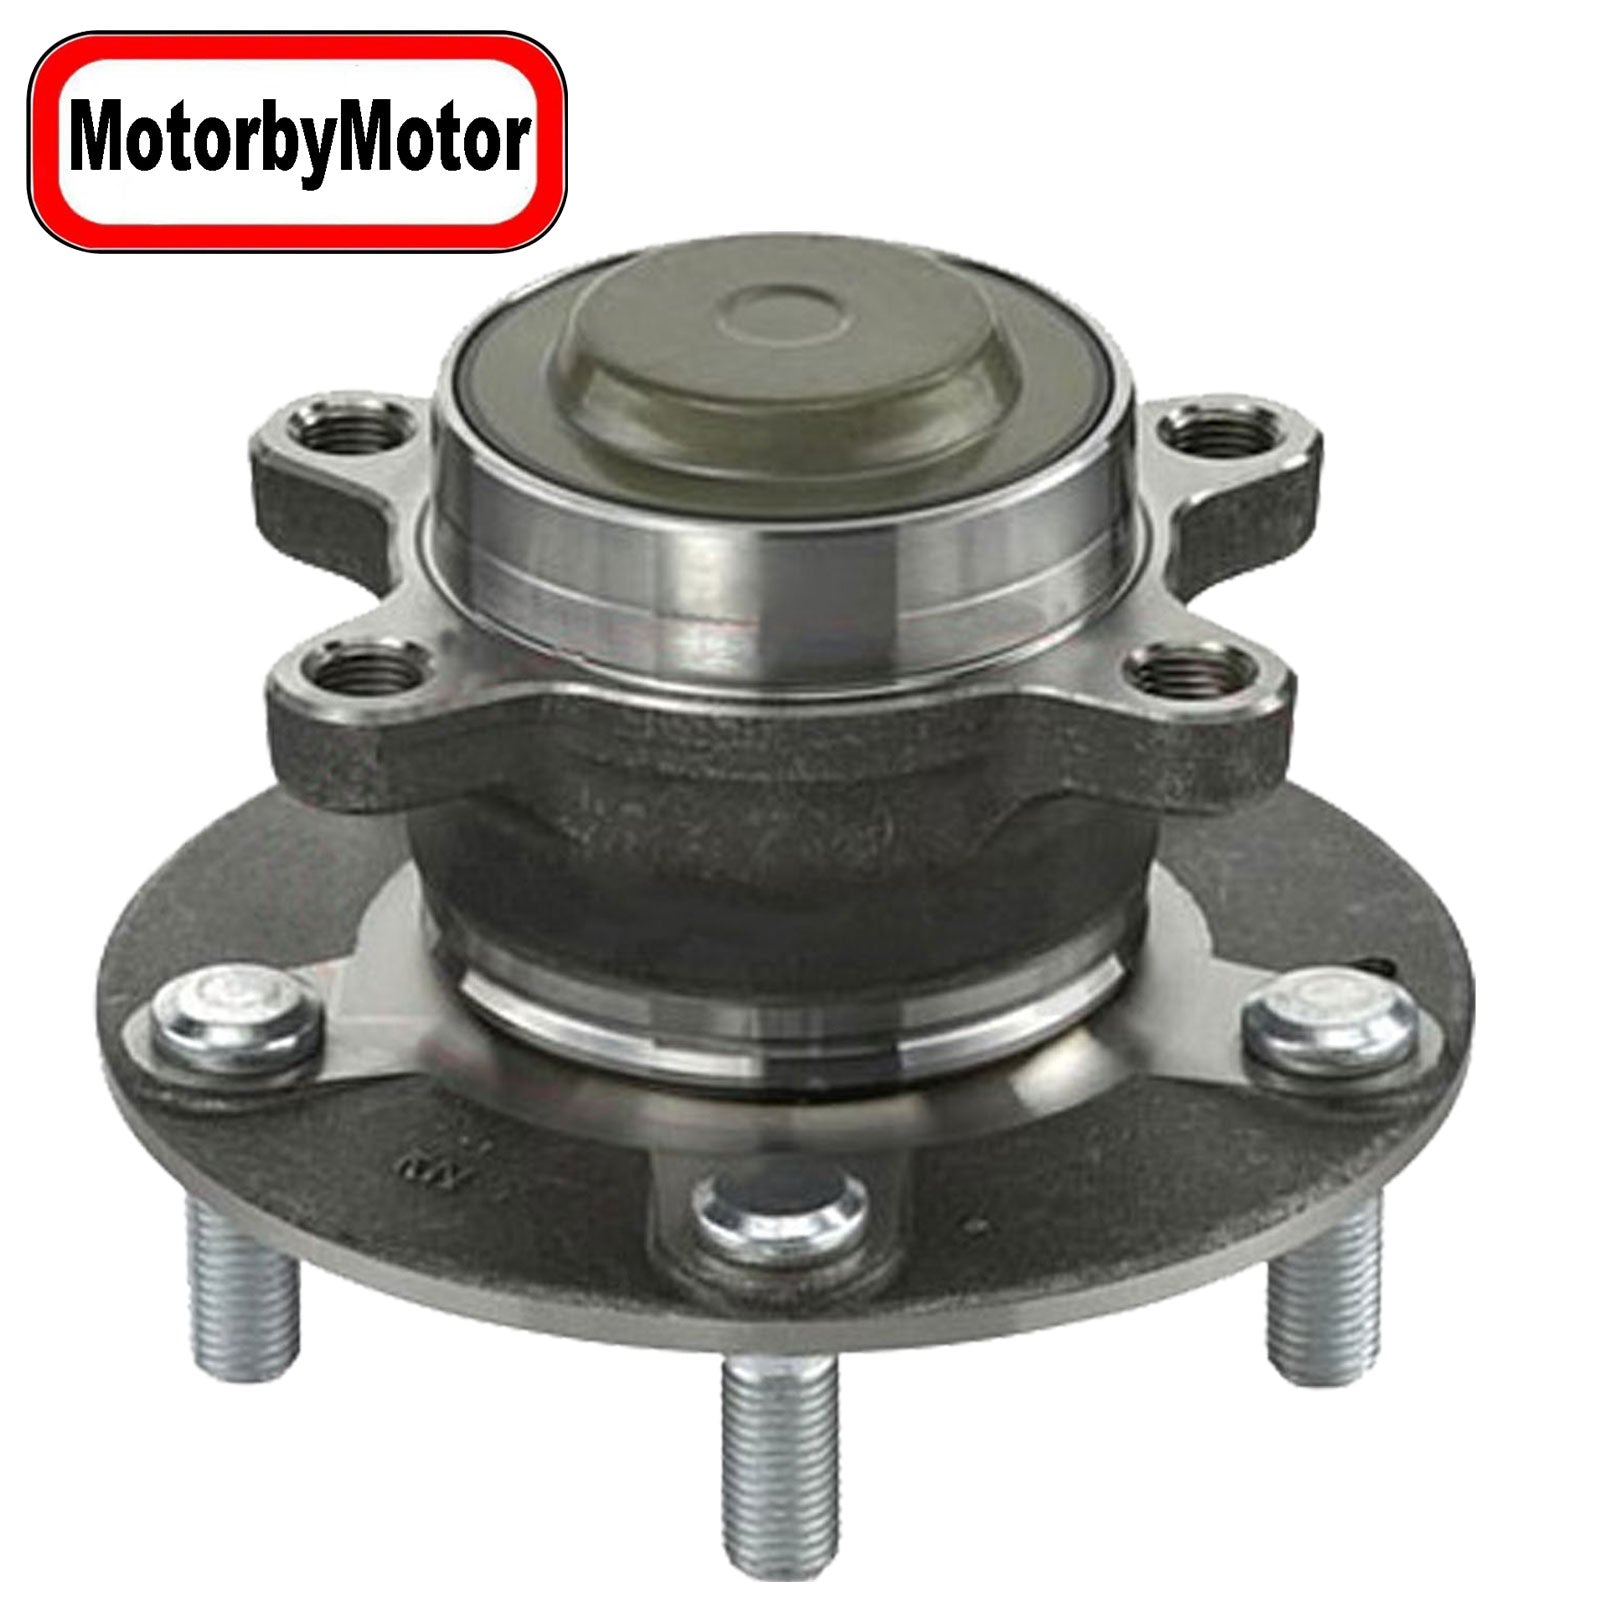 MotorbyMotor 512570 Rear wheel Bearing and Hub Assembly with 5 Lugs Fits for 2016-2019 Honda Civic, 2019 Honda Insight Low-Runout OE Directly Replacement Hub Bearing MotorbyMotor